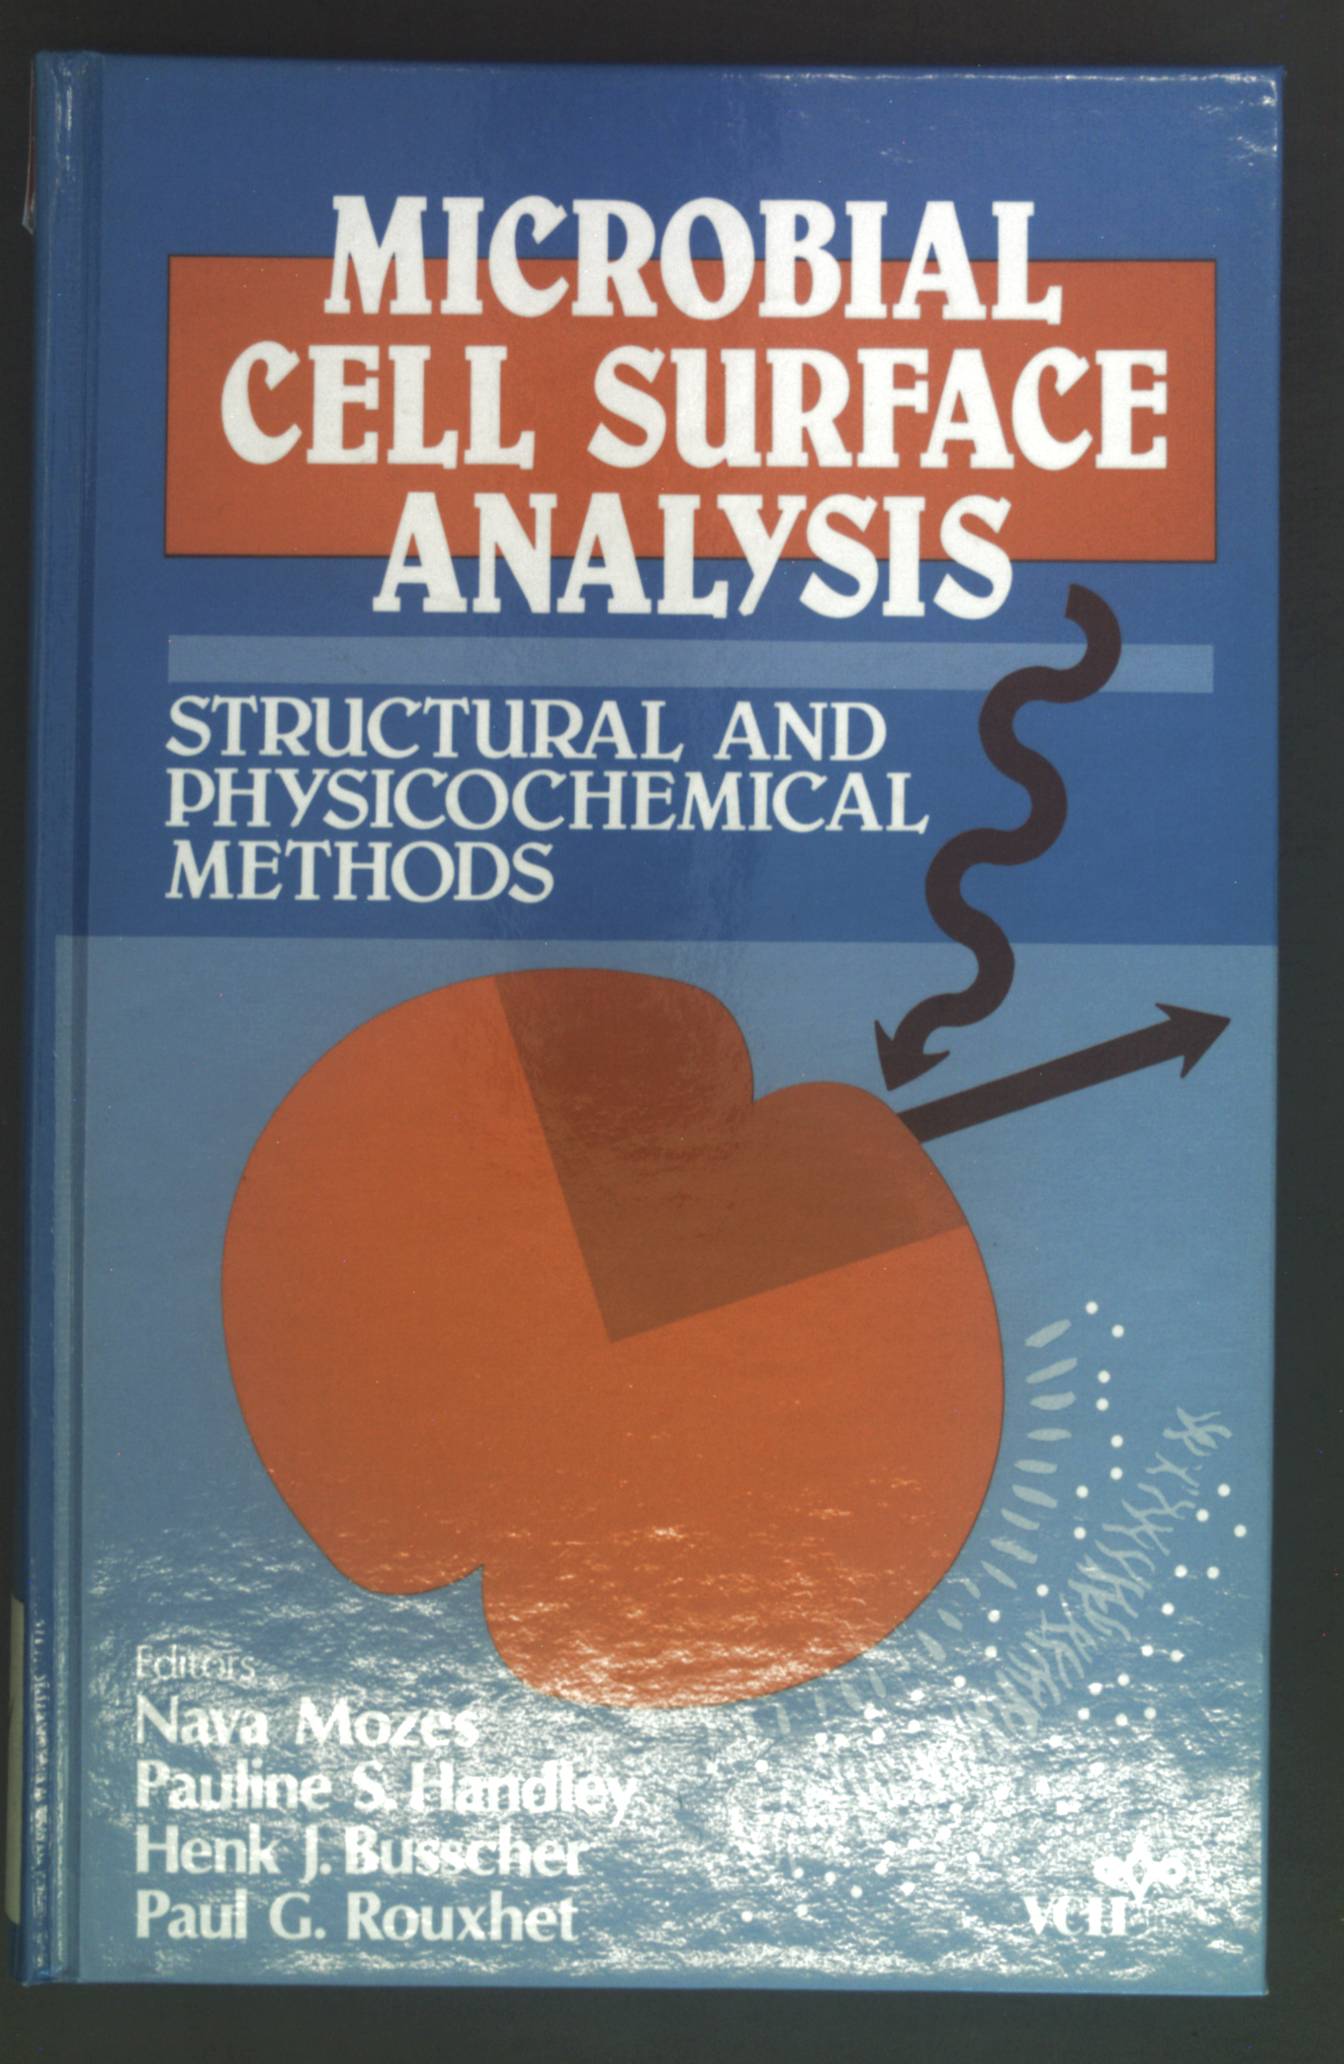 Microbial cell surface analysis : structural and physicochemical methods. - Mozes, Nava